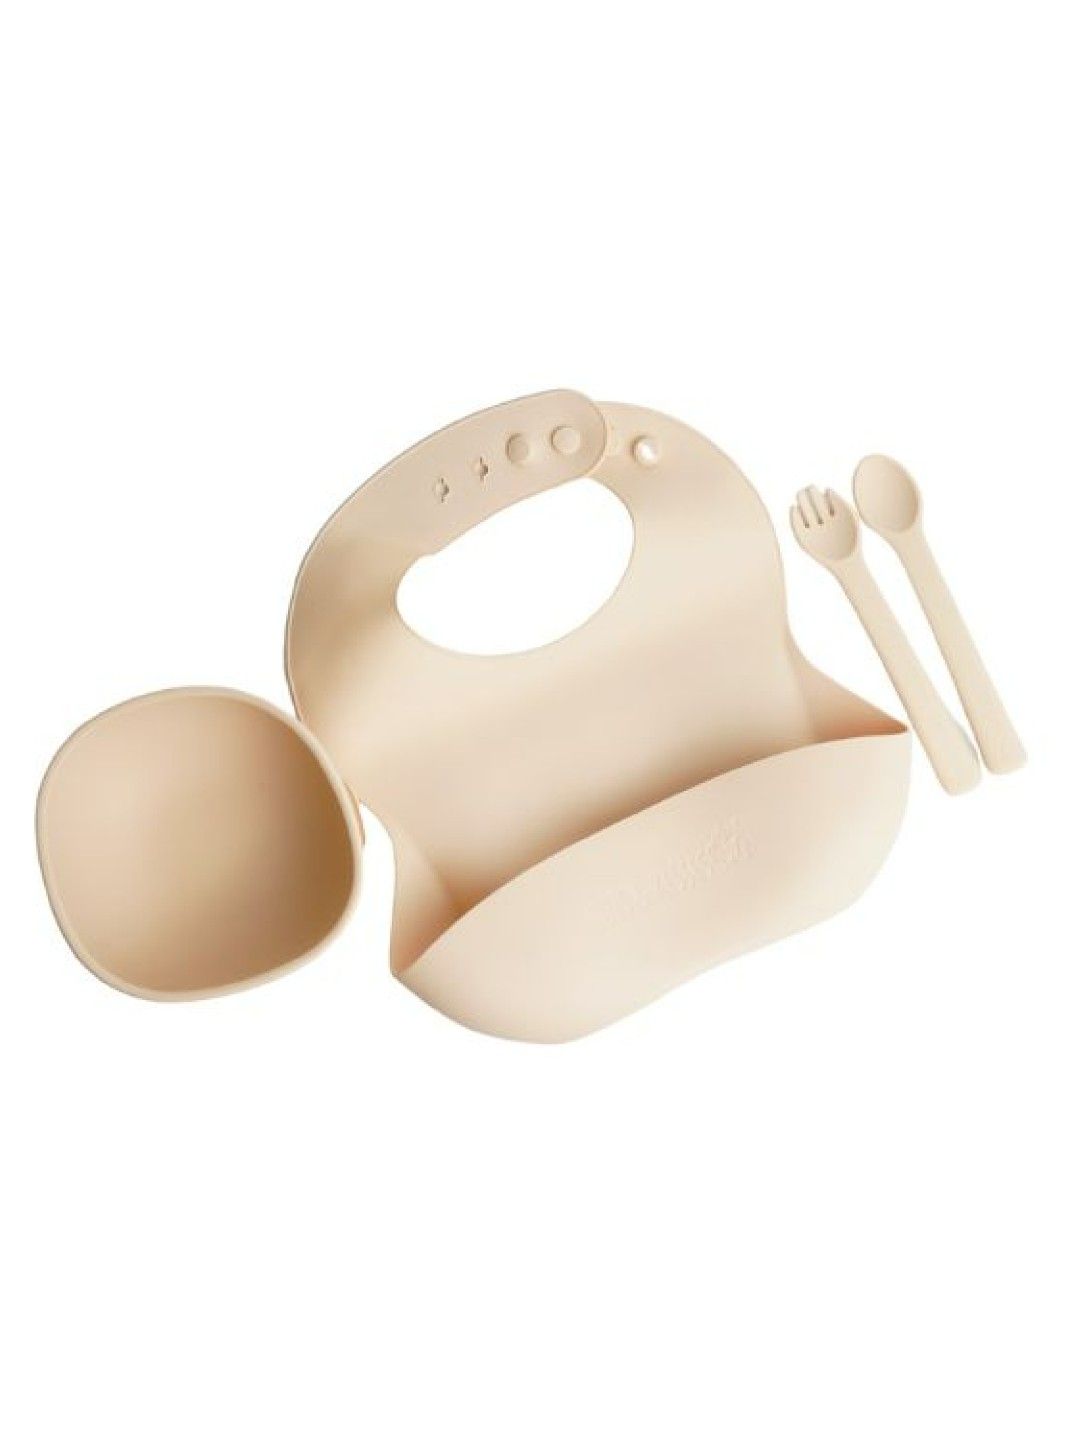 Tots & Kisses Silicone Meal Set